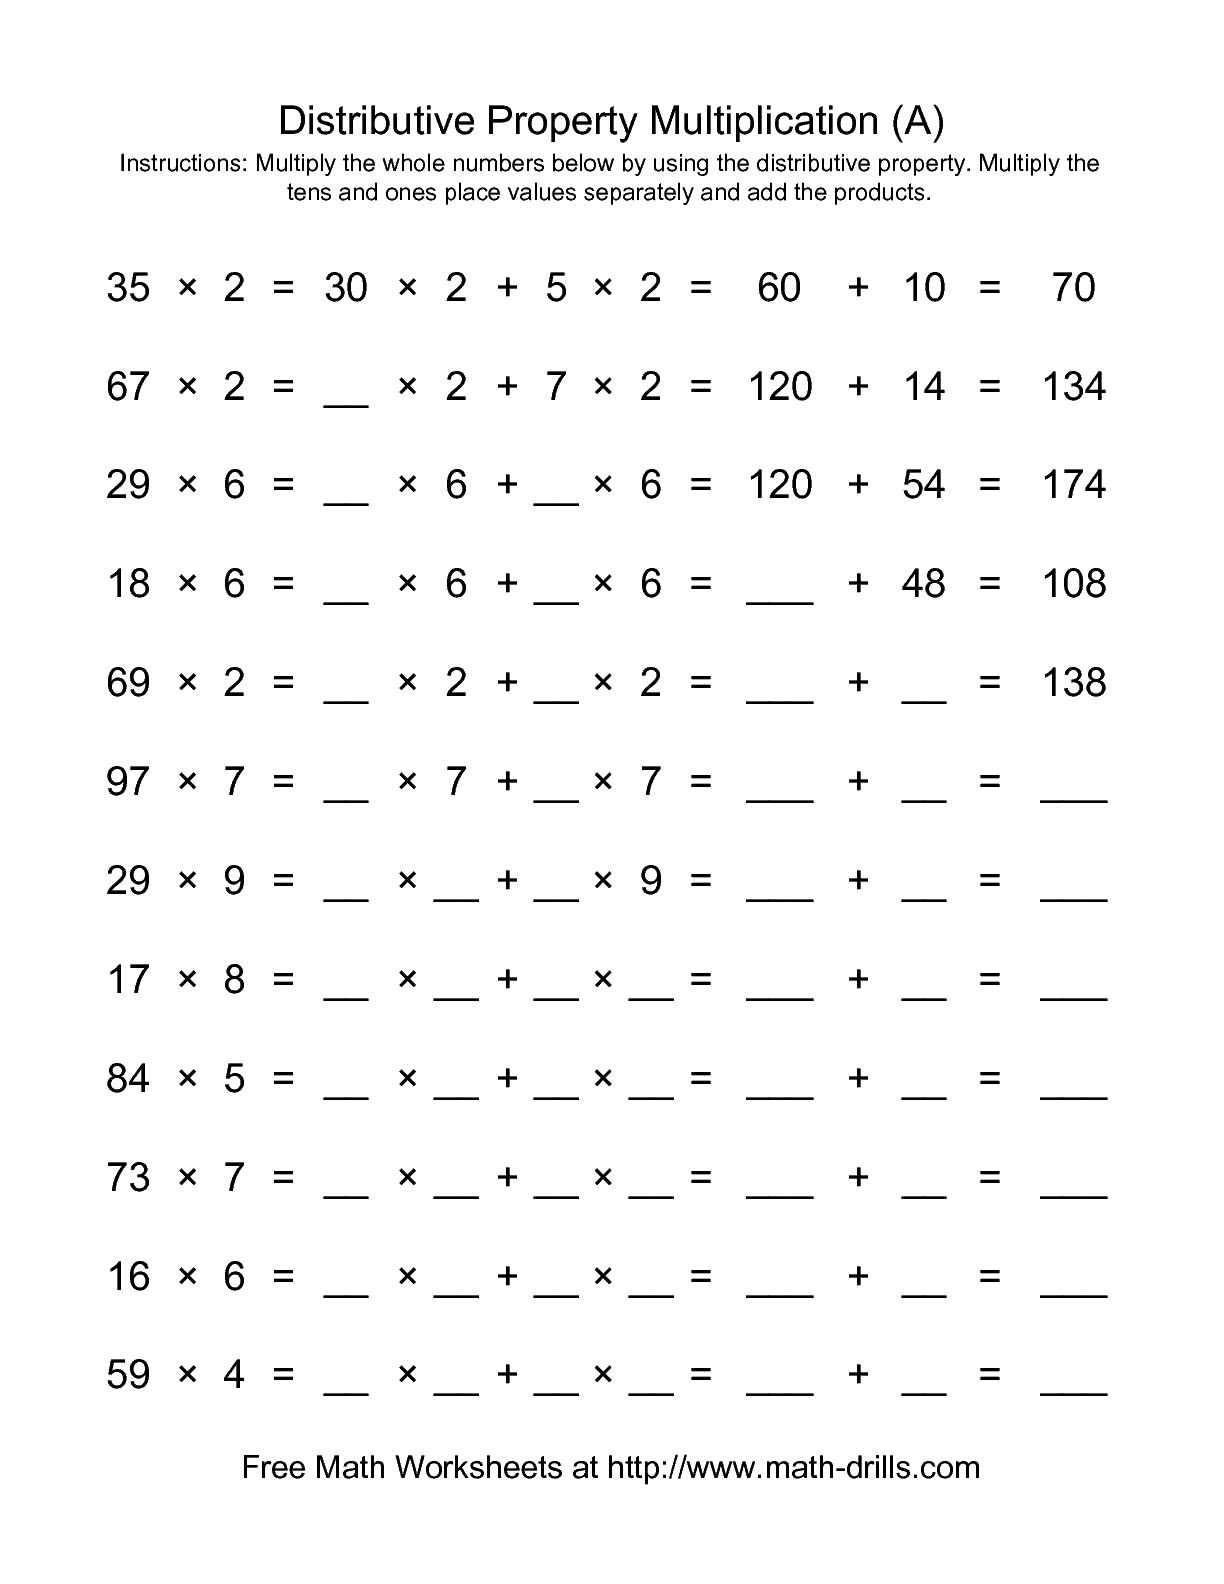 Factoring Using the Distributive Property Worksheet Answers and Multiplications Distributive Property Worksheet Inspirational